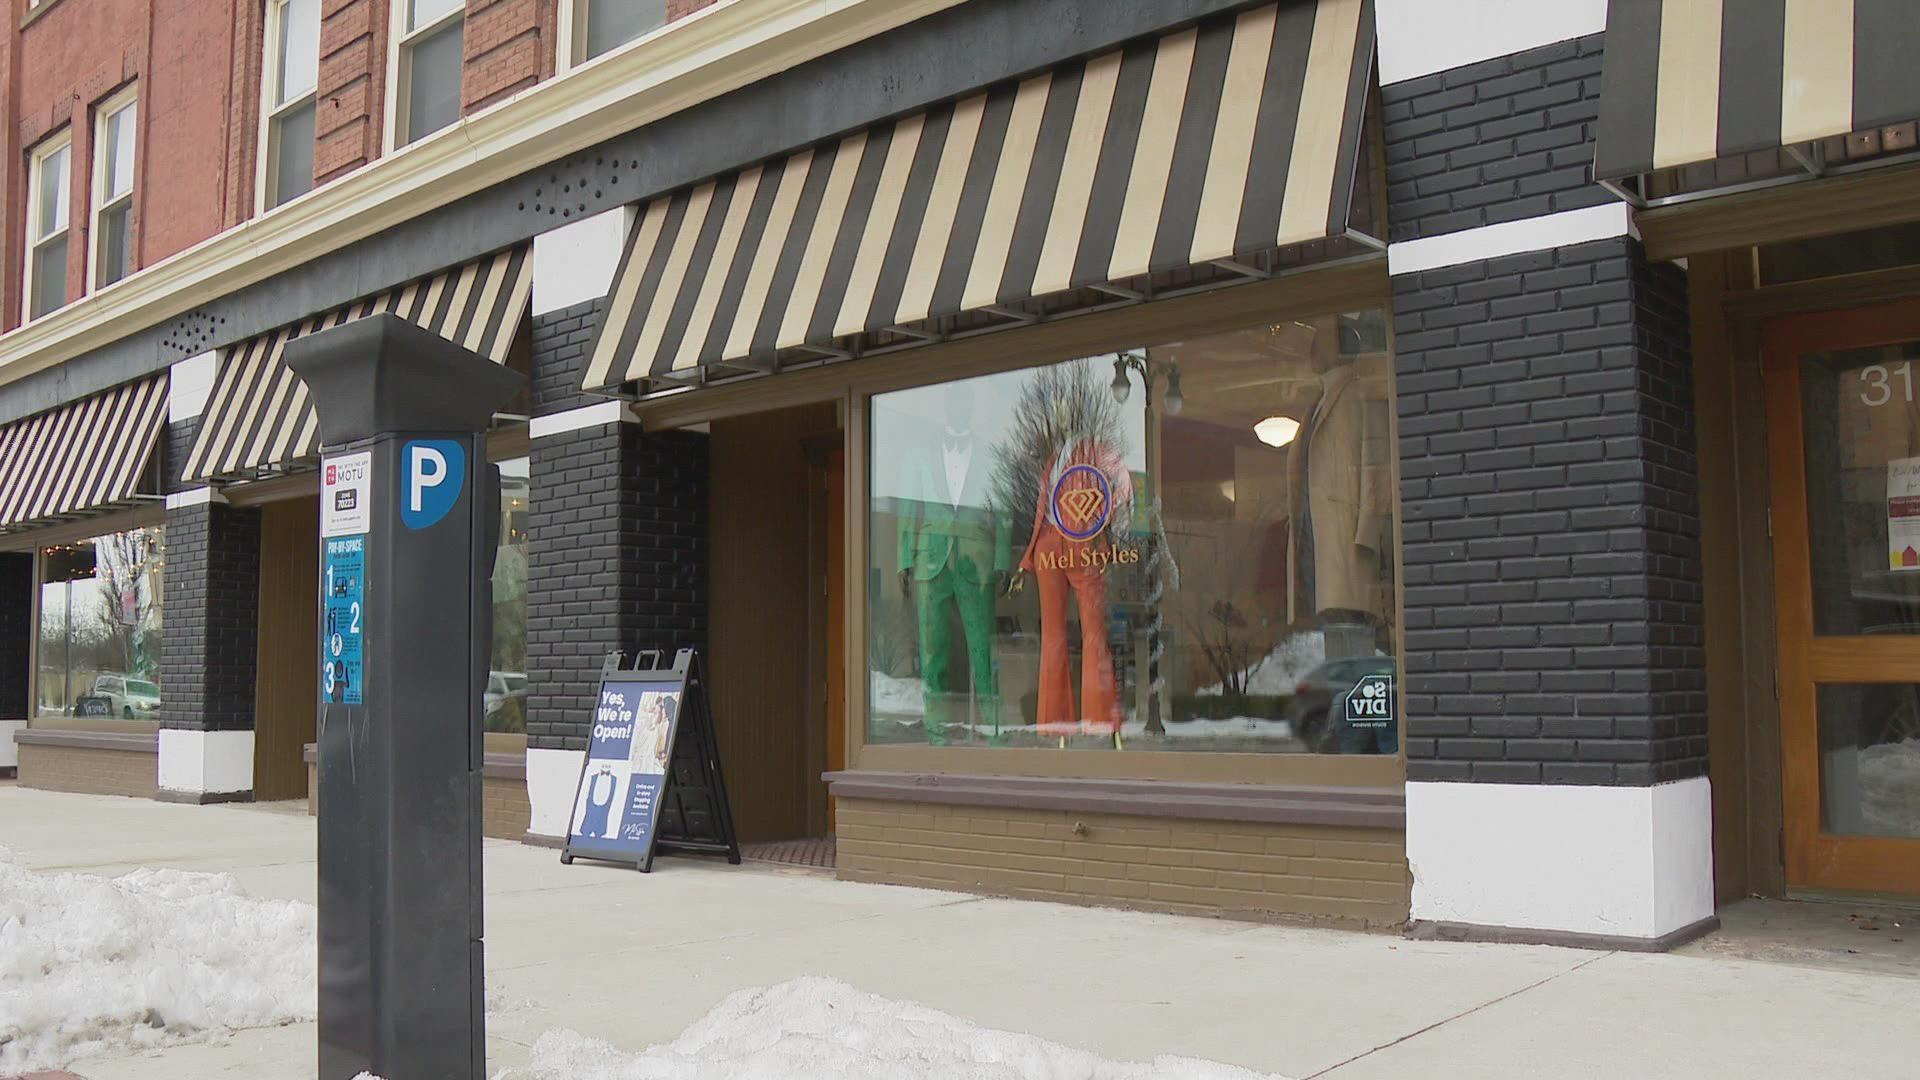 We're continuing our coverage of a 13 ON YOUR SIDE investigation into a custom suits shop in downtown Grand Rapids.